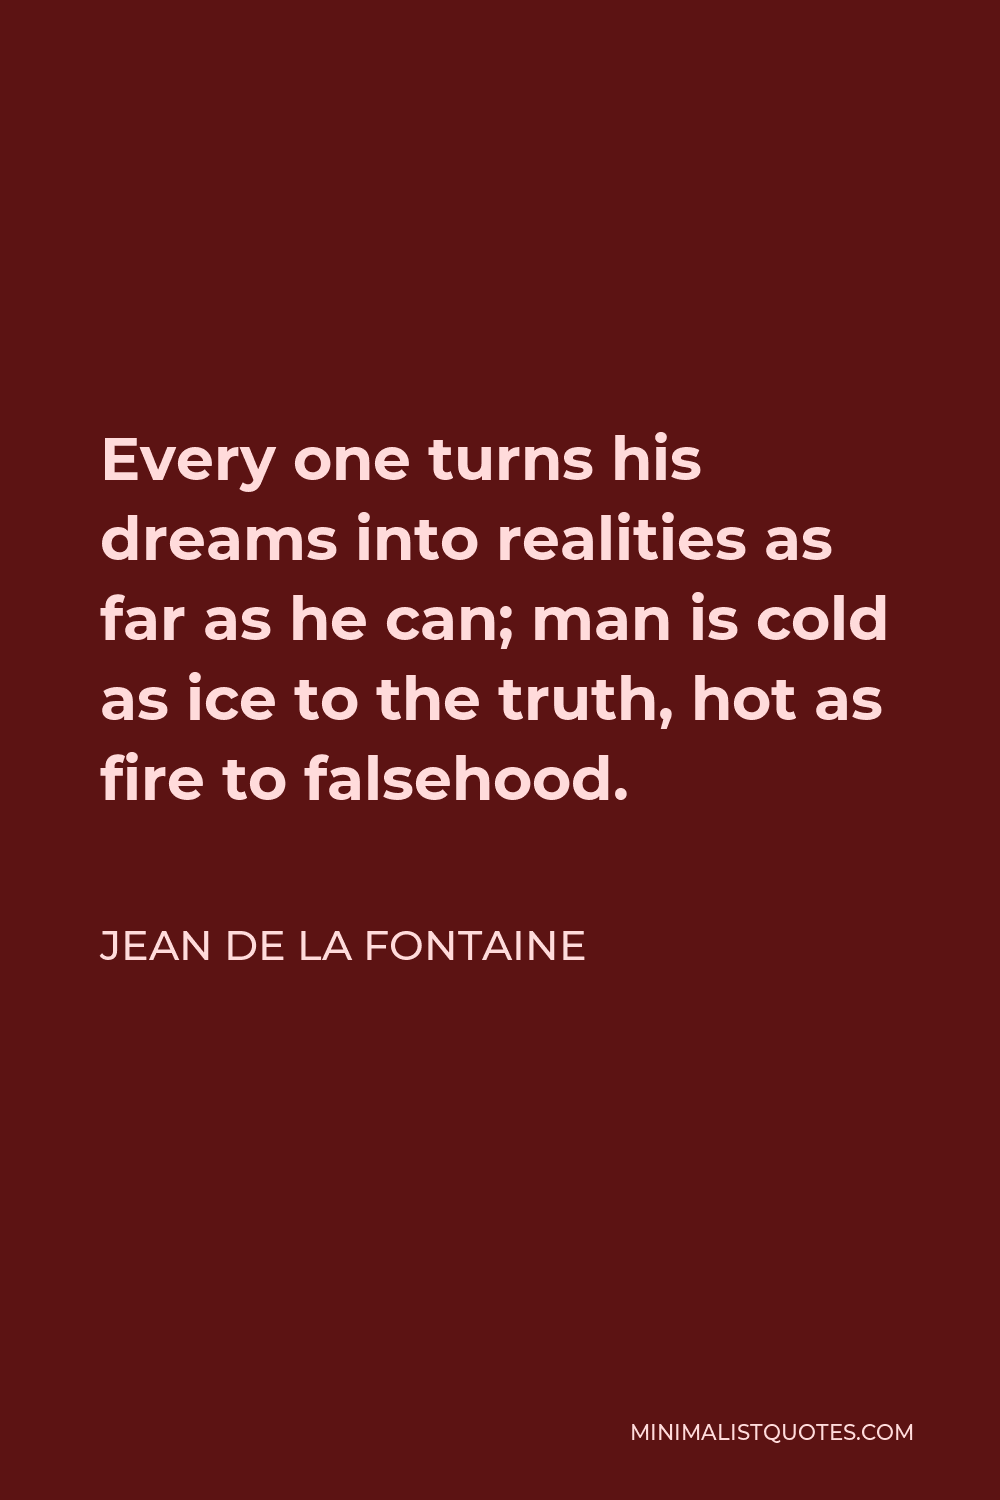 Jean de La Fontaine Quote - Every one turns his dreams into realities as far as he can; man is cold as ice to the truth, hot as fire to falsehood.